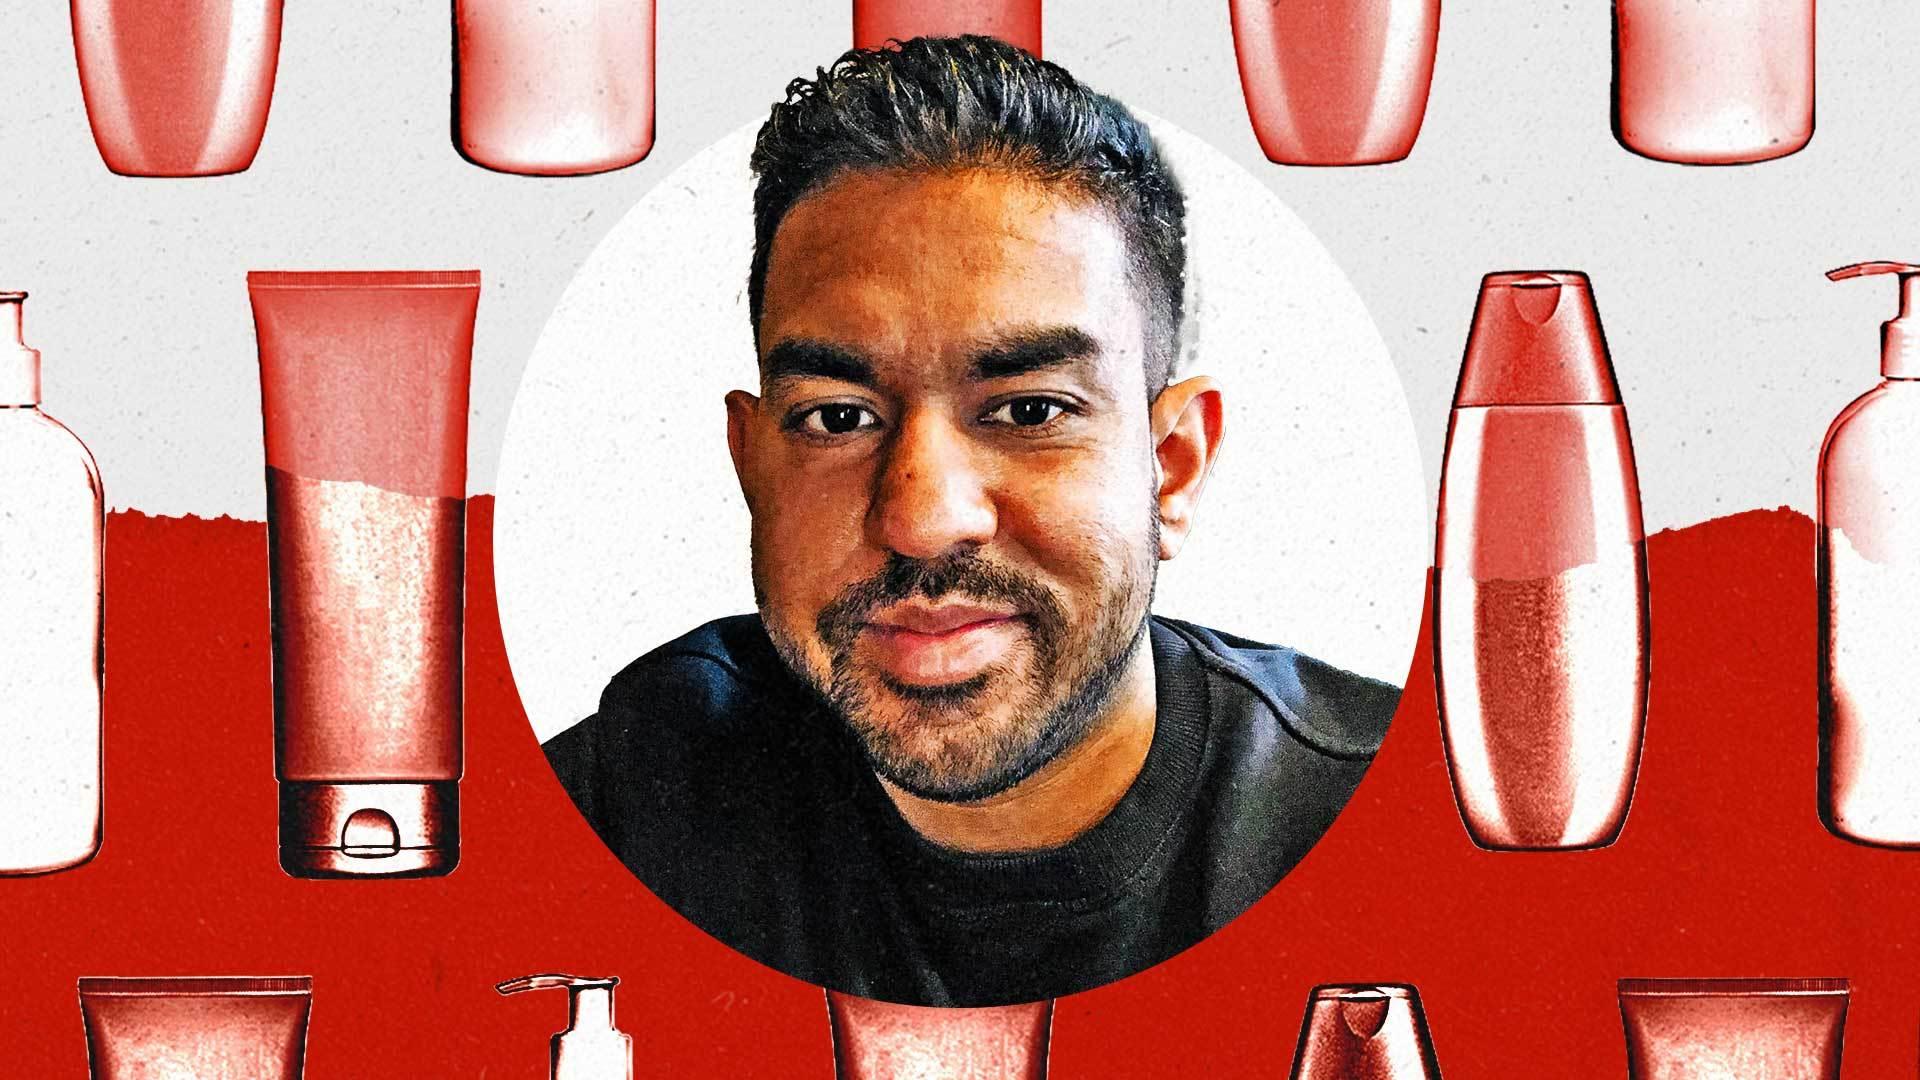 Headshot of Andrew Jude Rajanathan, EMEA media lead at Johnson & Johnson, amidst stylized imagery of products typically sold by J&J